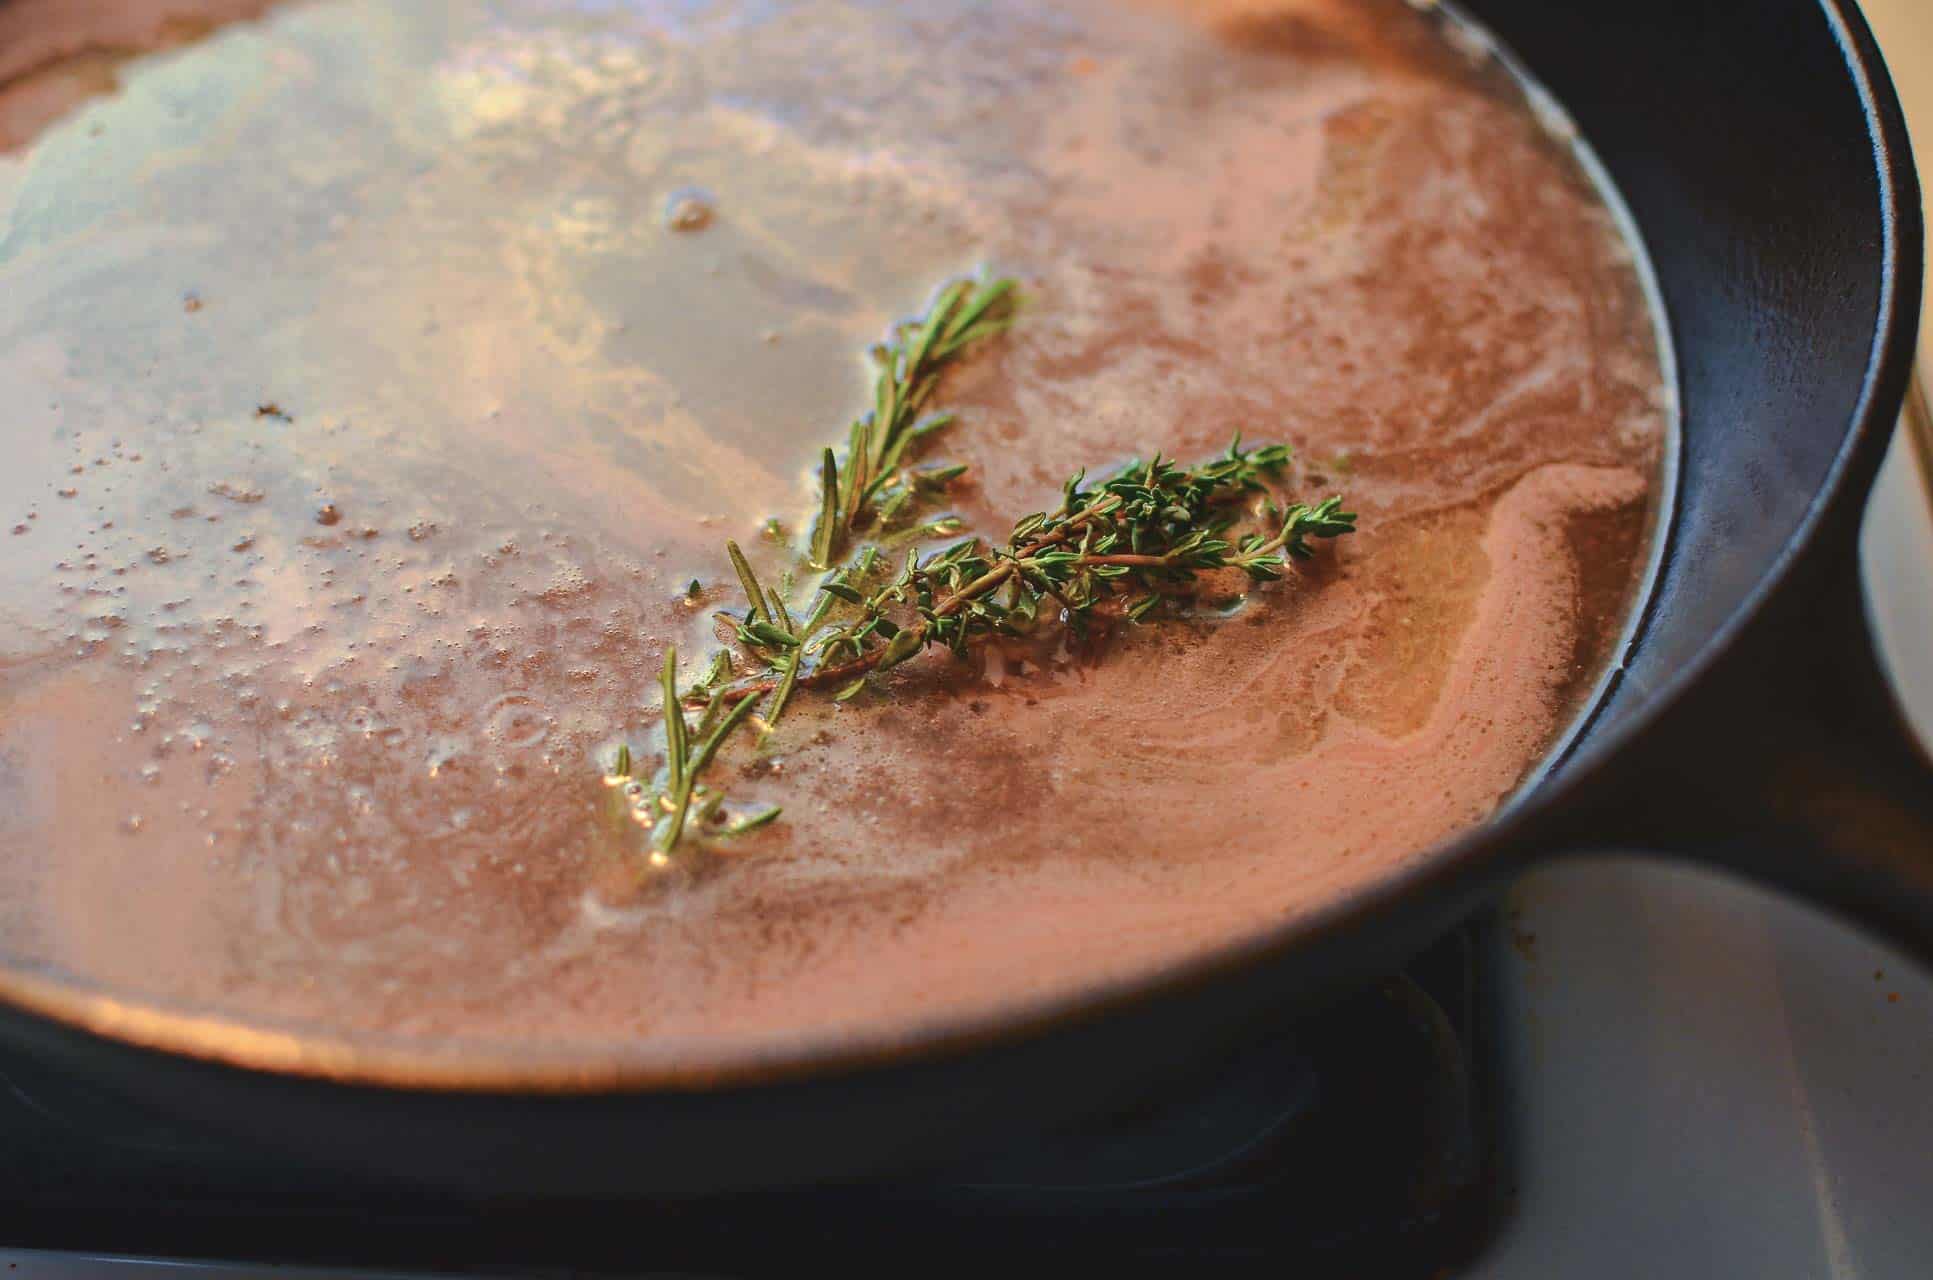 A pan with a thin layer of broth and sprigs of fresh thyme and parsley